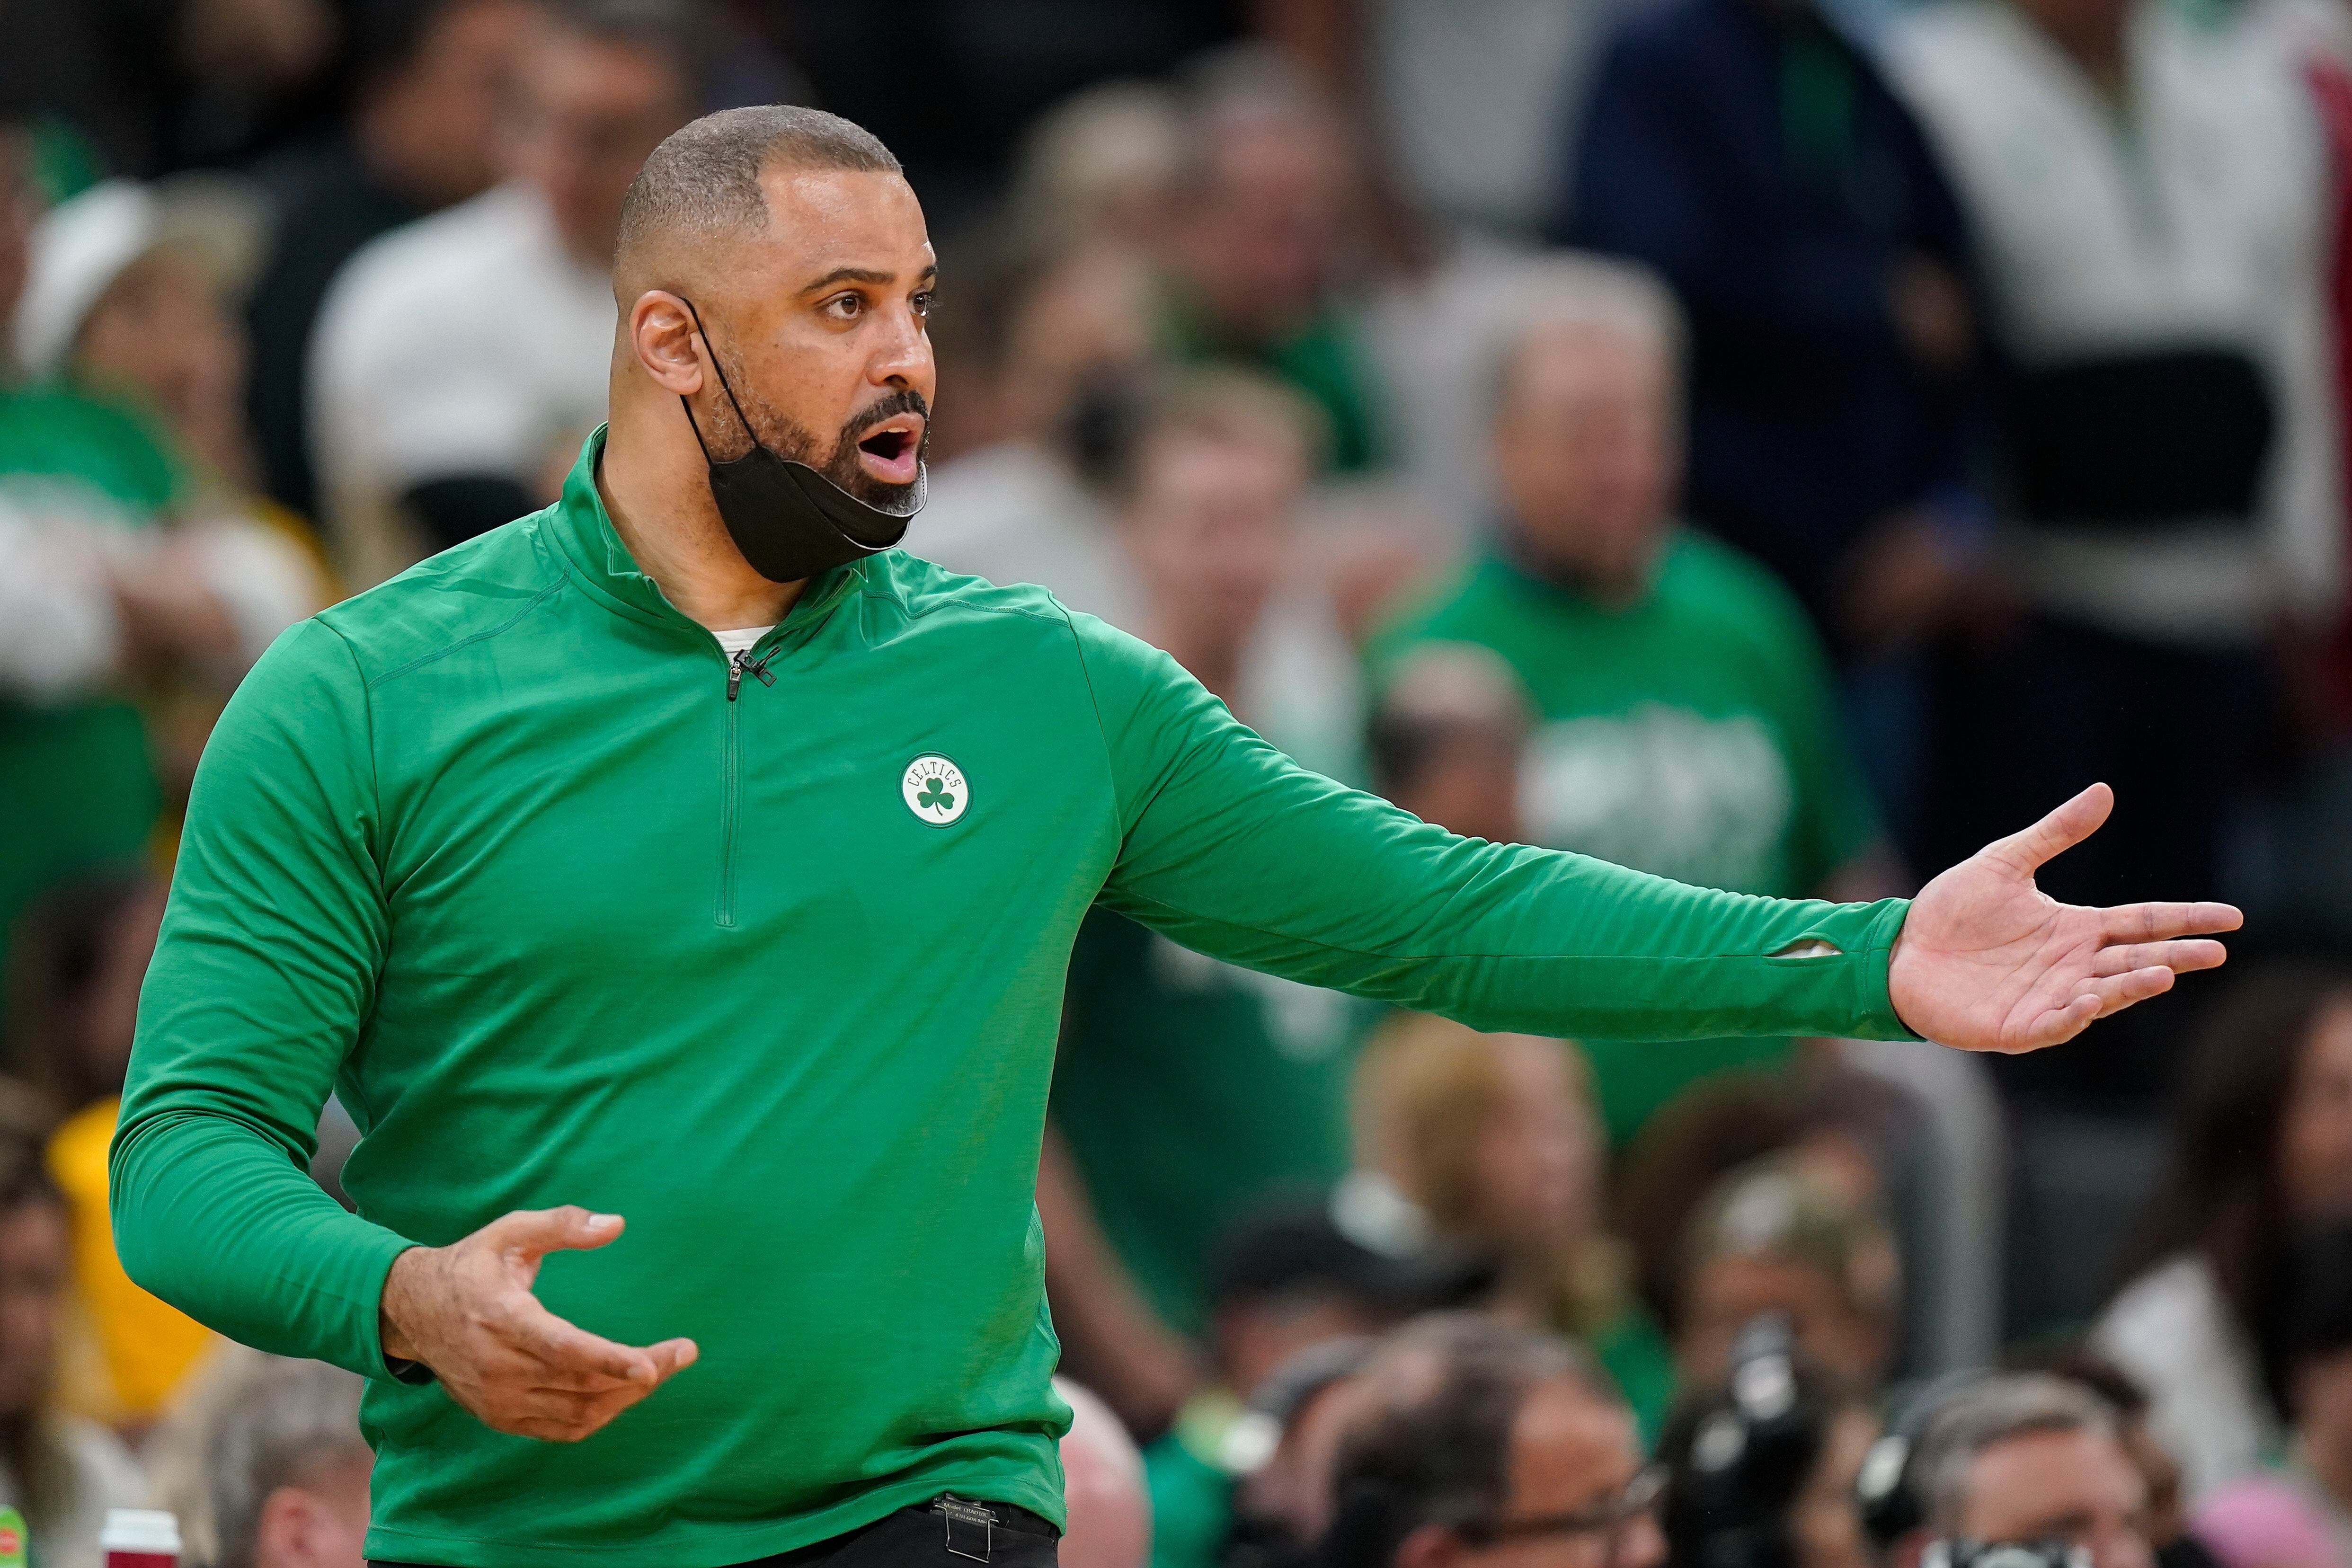 Boston Celtics coach Ime Udoka suspended for the 2022-23 season for  violating team policies - The Globe and Mail